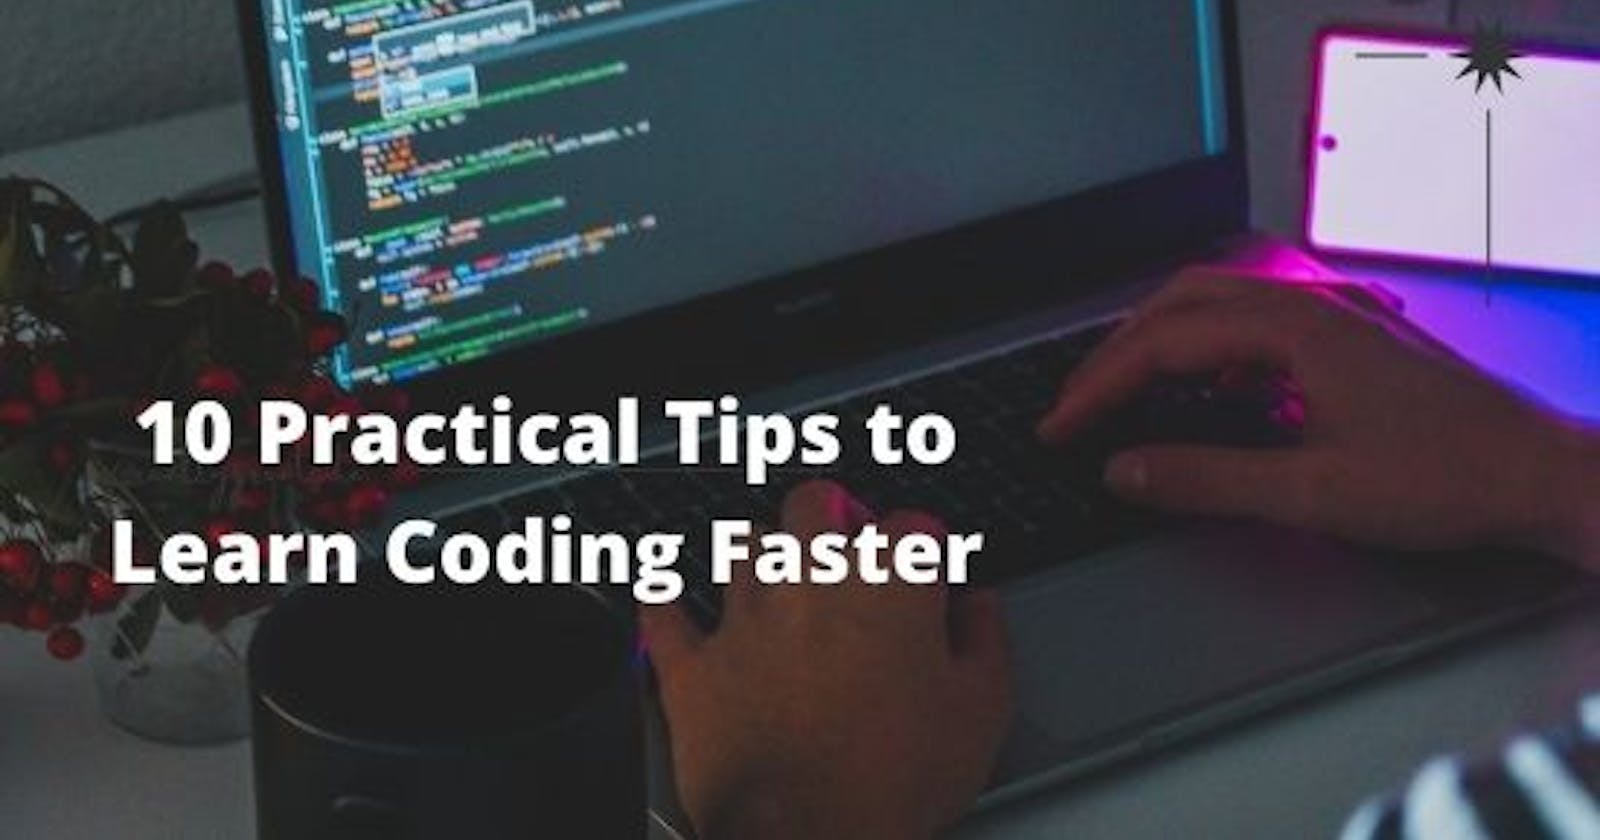 10 Practical Tips to Learn coding Faster